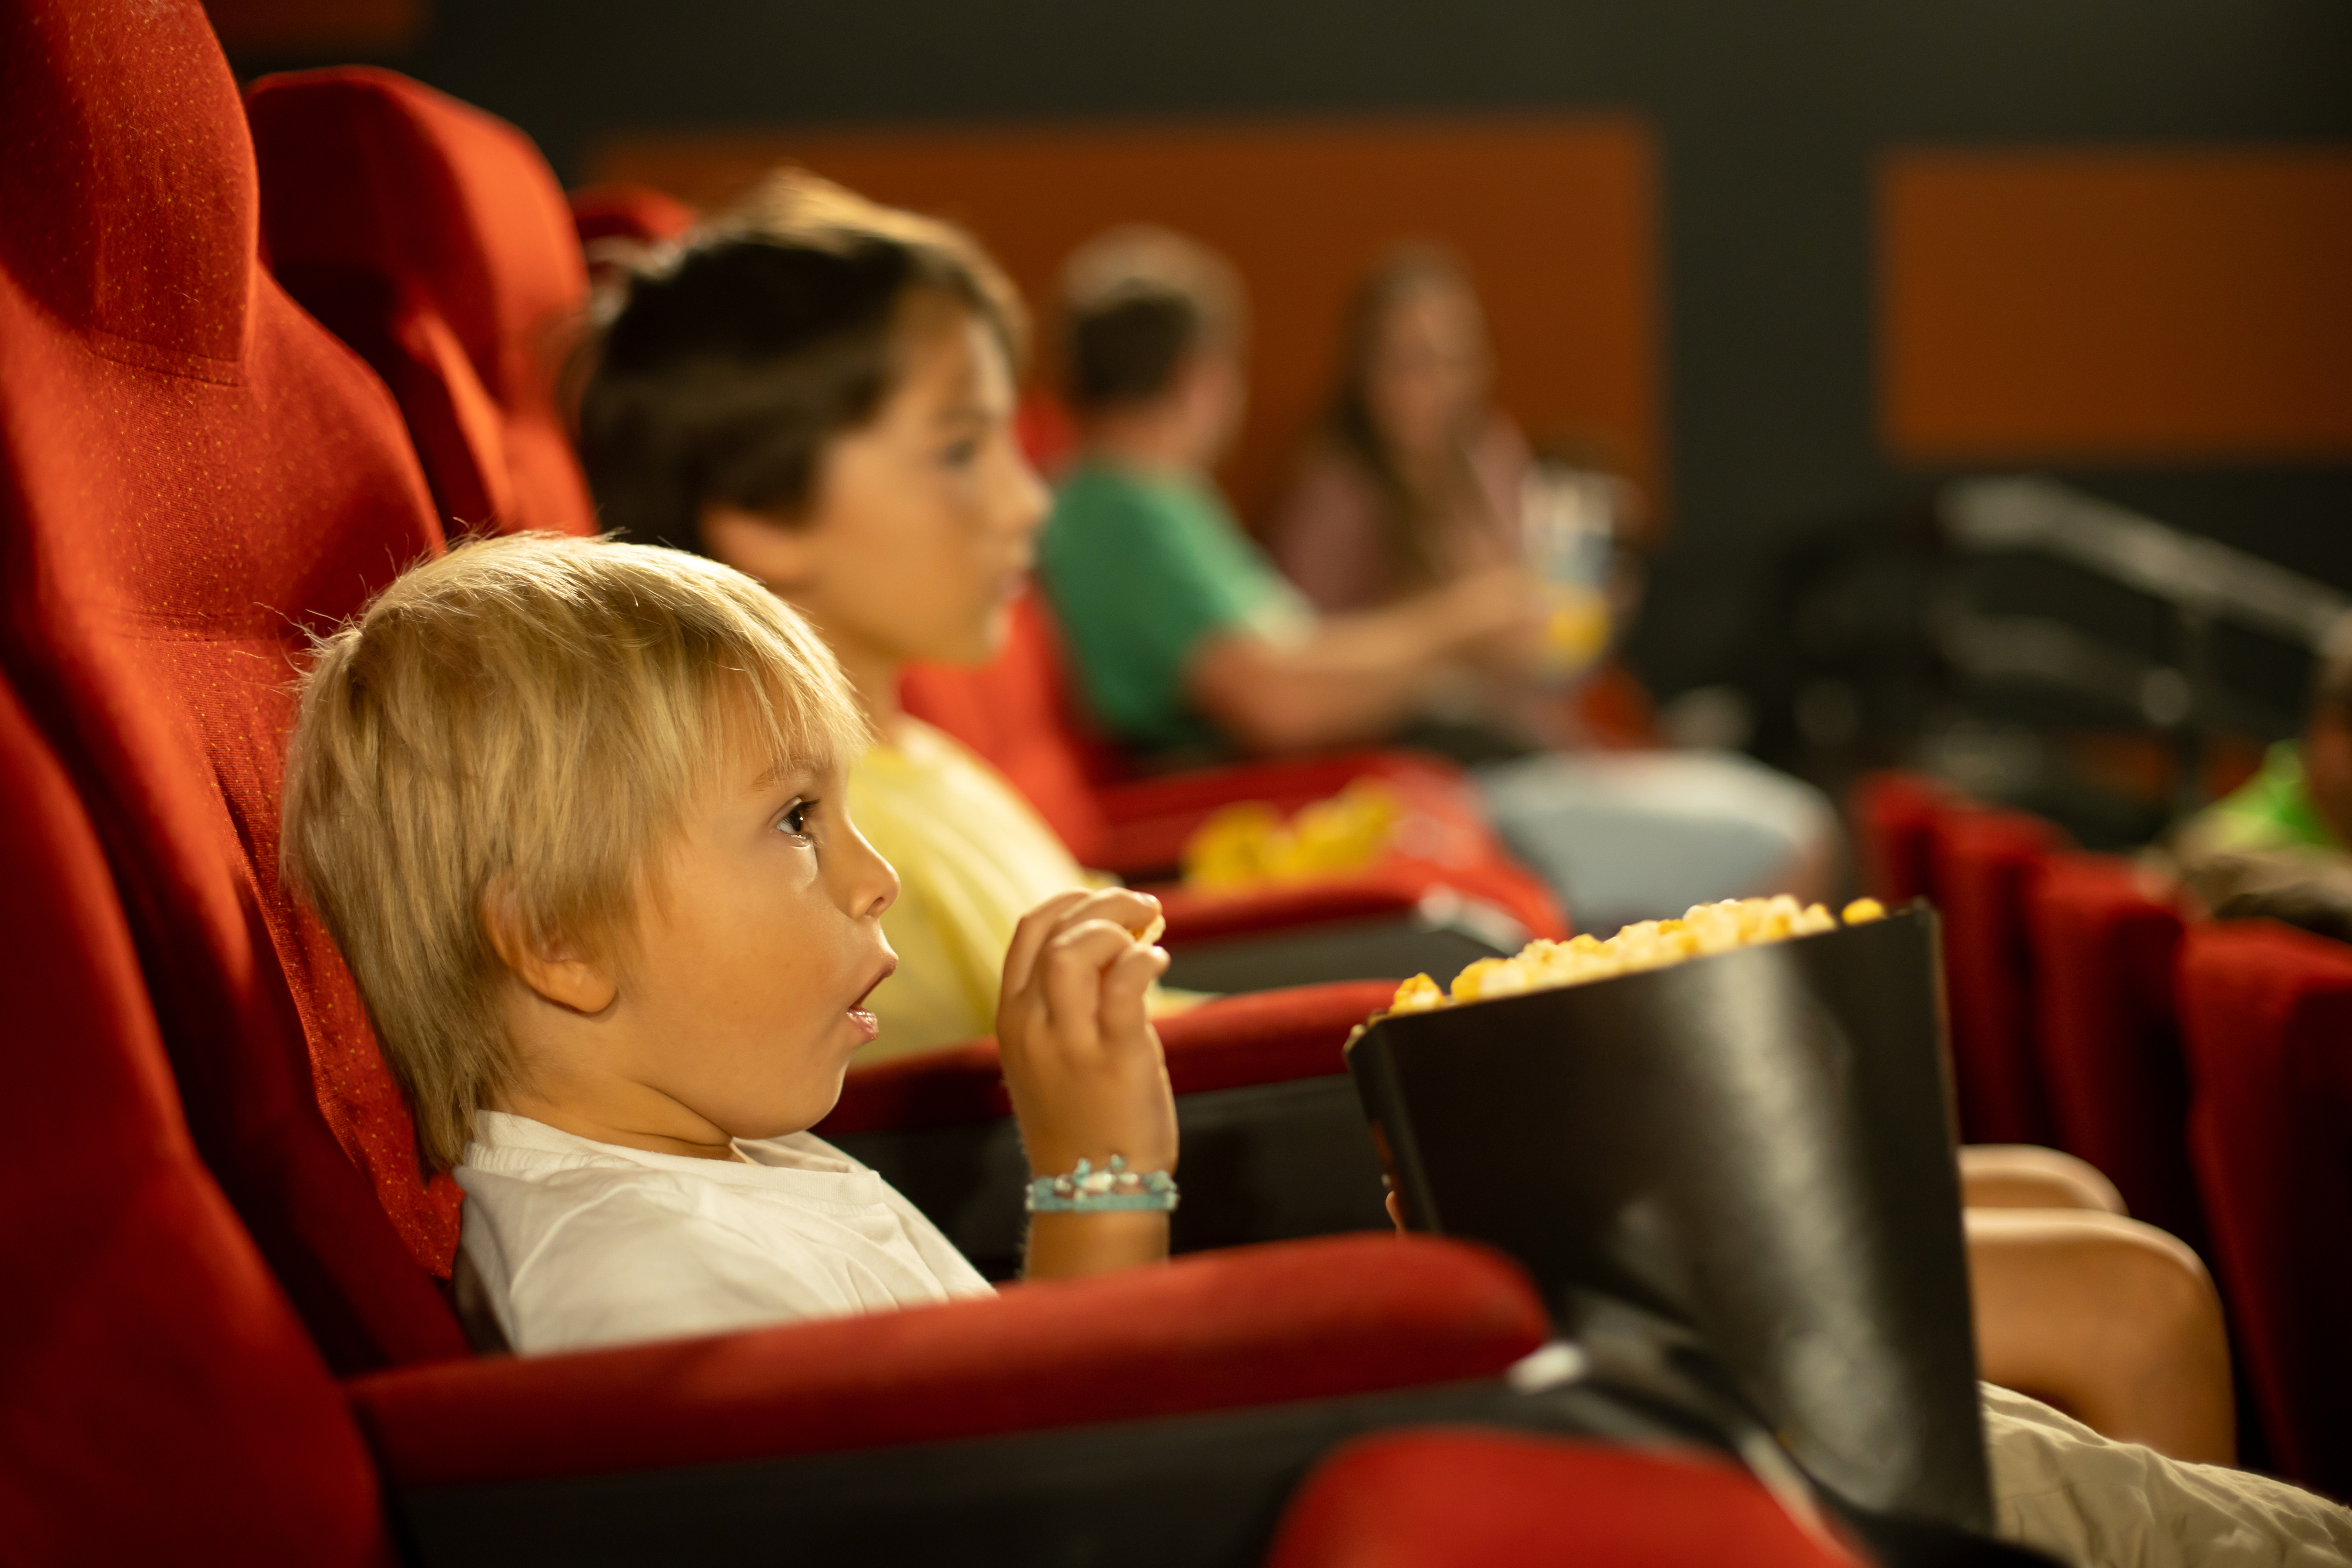 A child eating popcorn in a movie theater